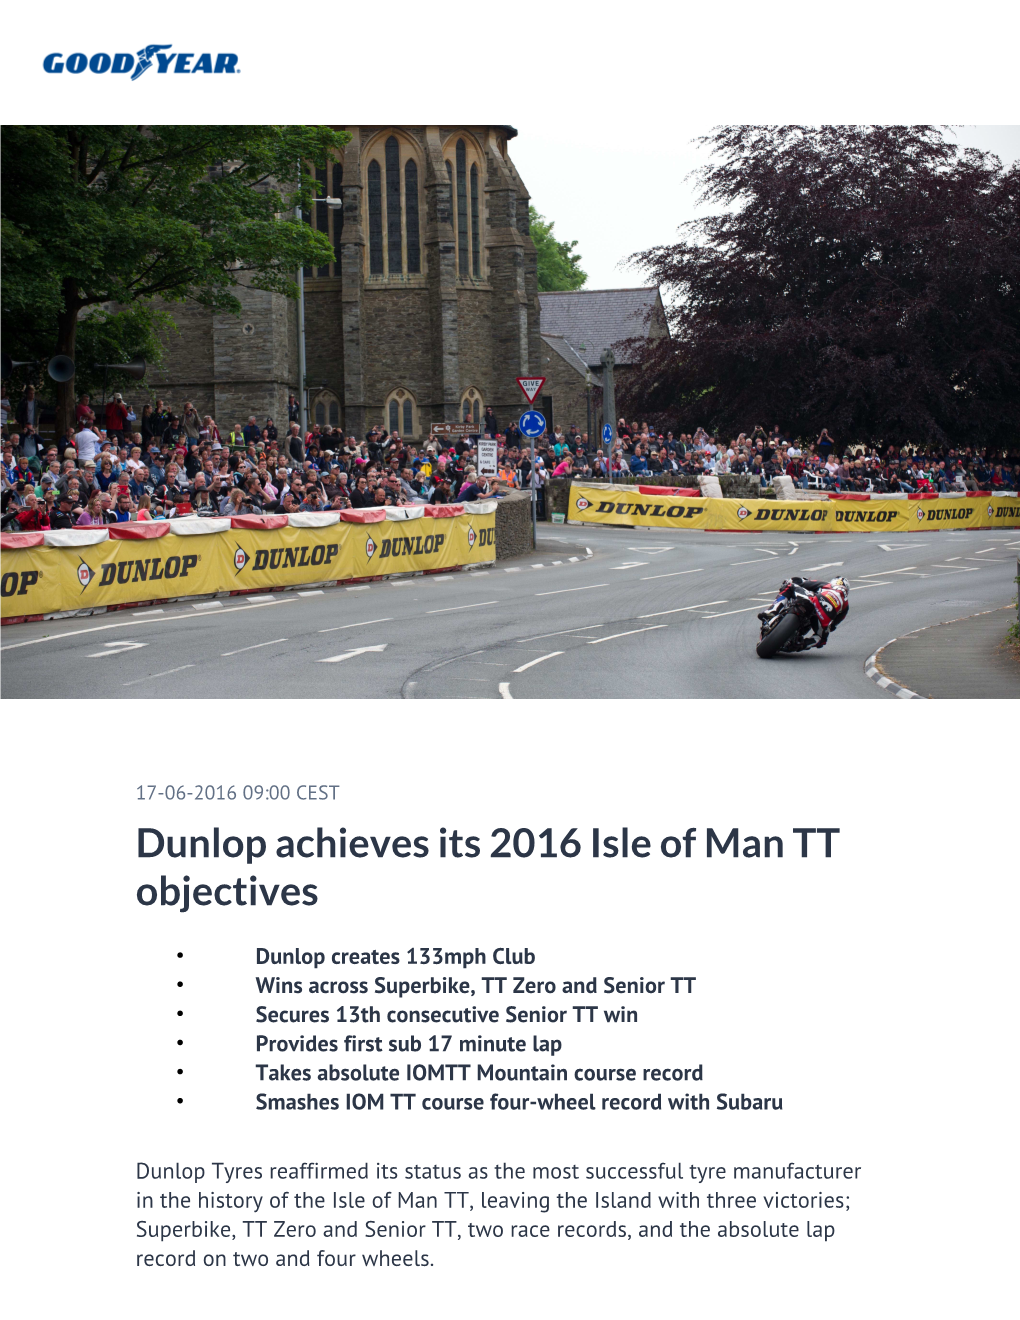 Dunlop Achieves Its 2016 Isle of Man TT Objectives